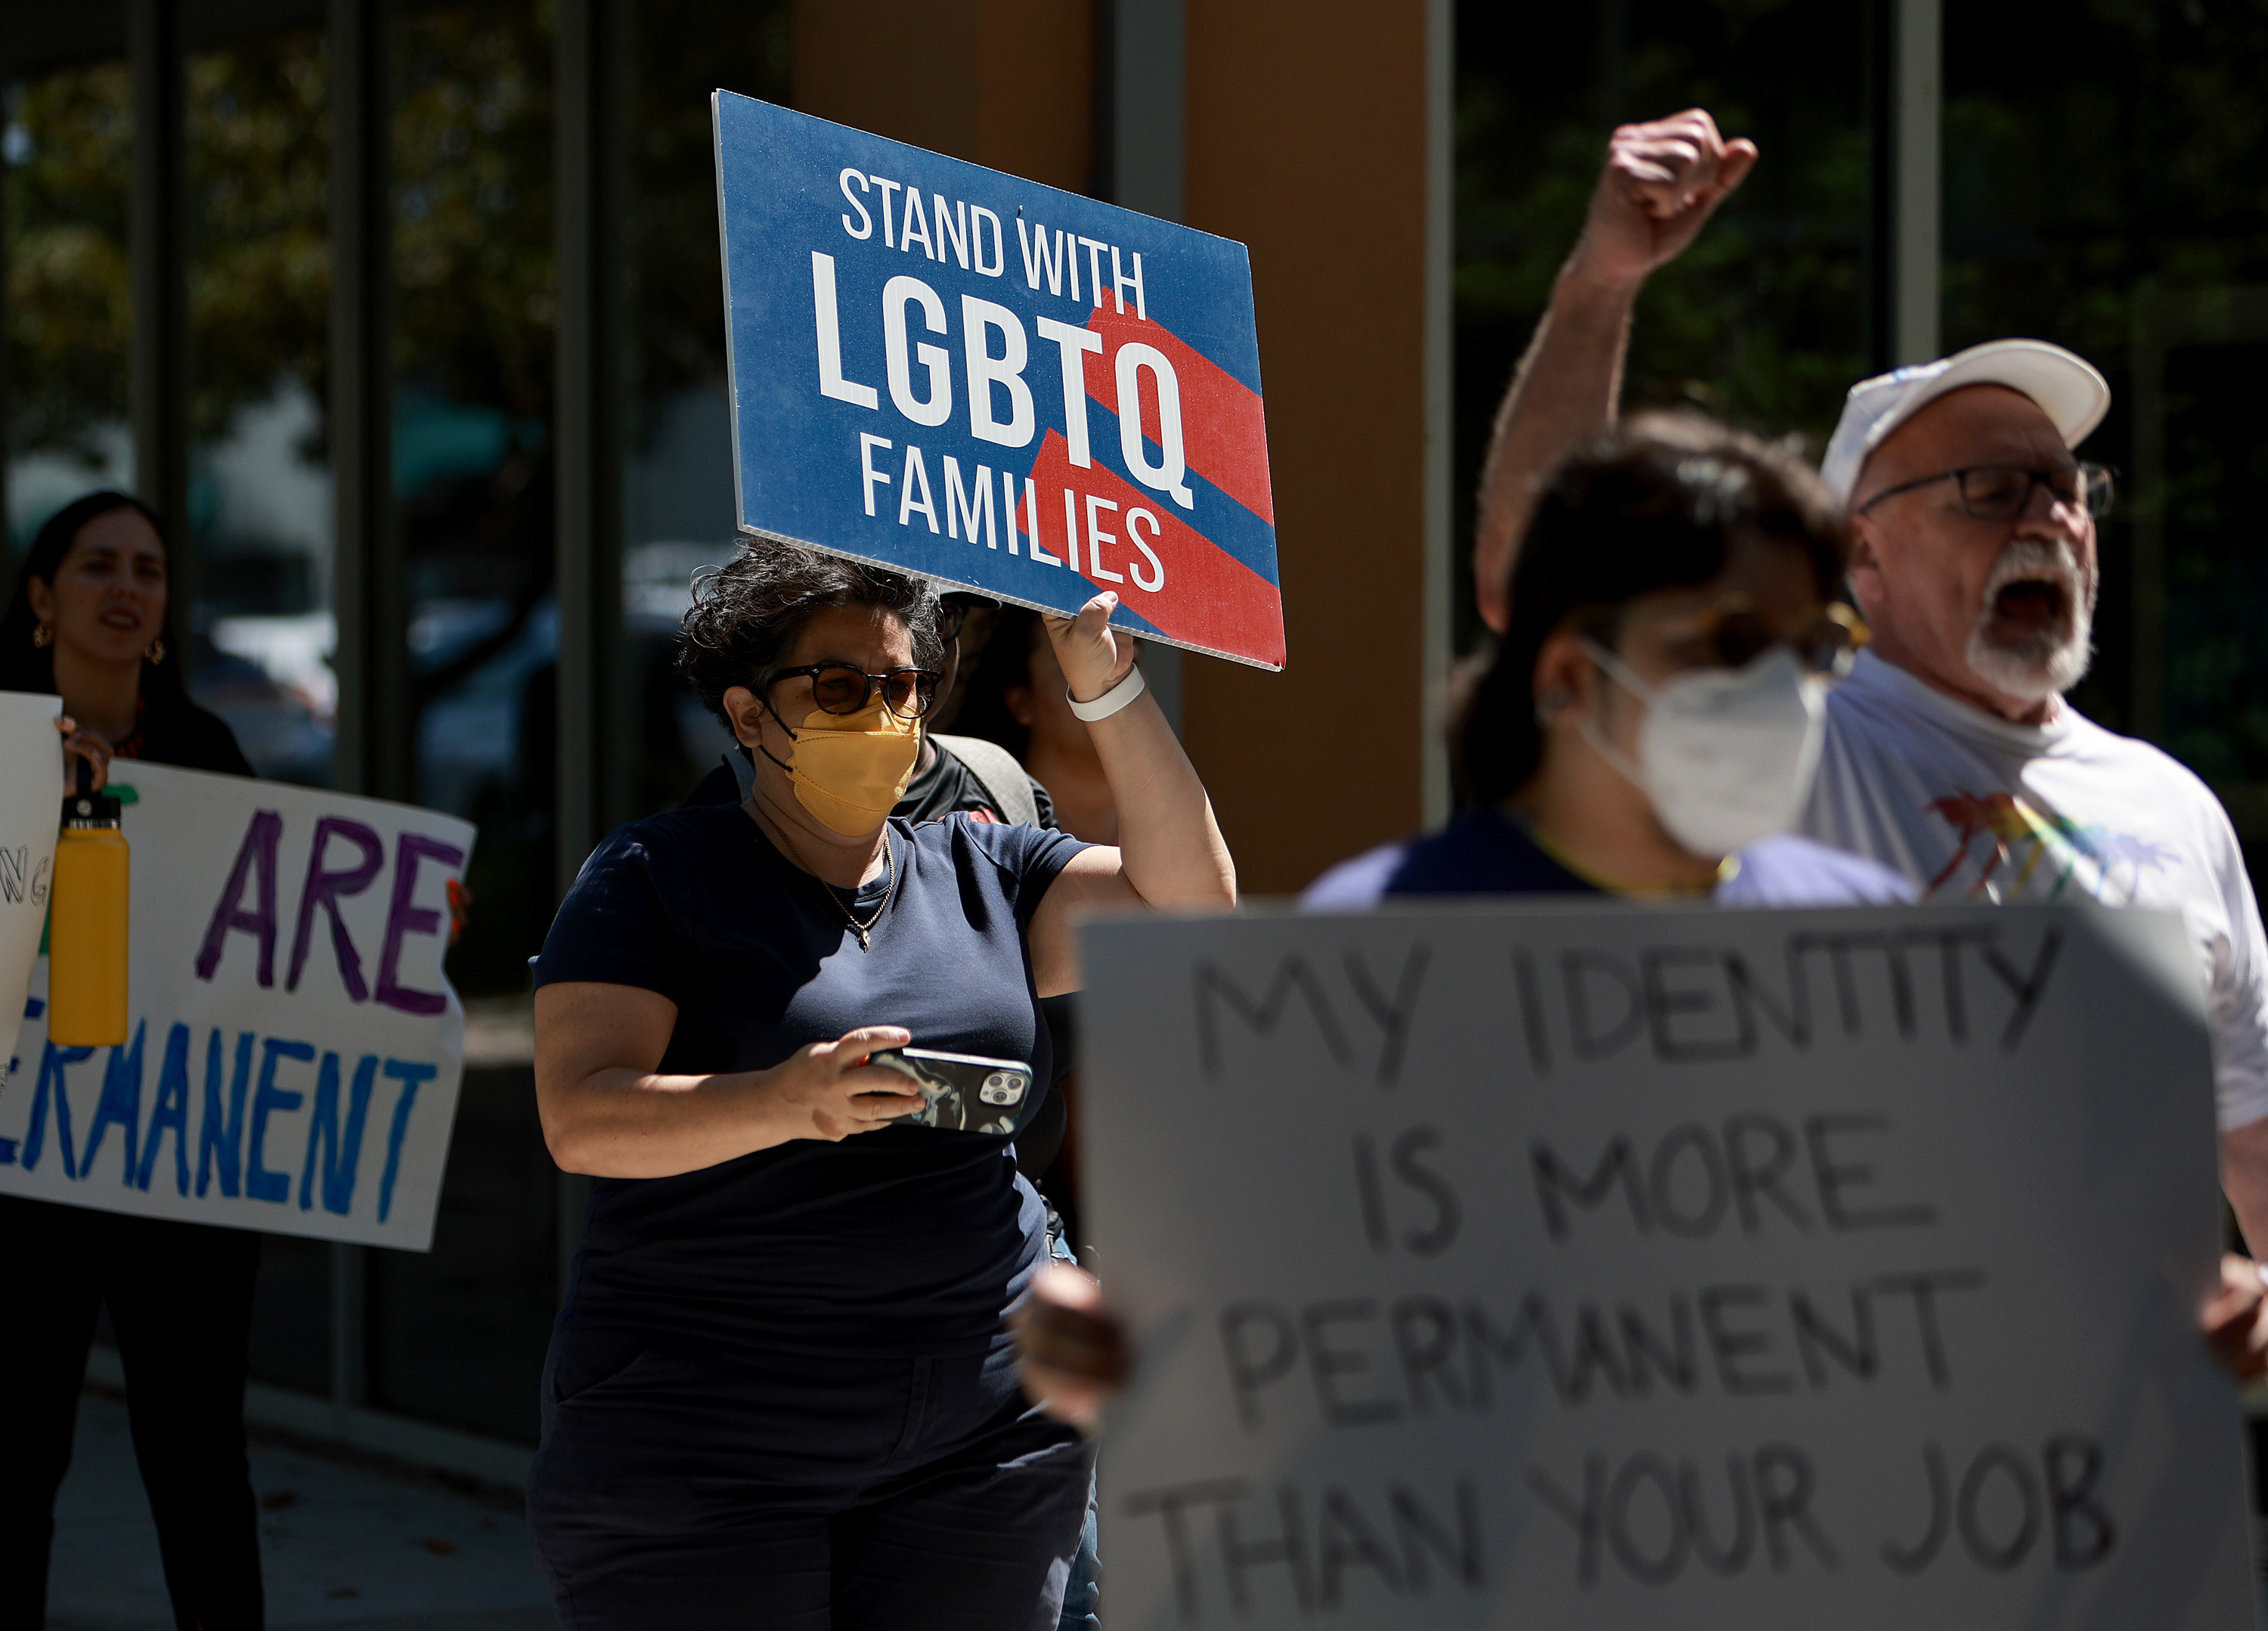 Rallygoers hold signs supporting LGBTQ families